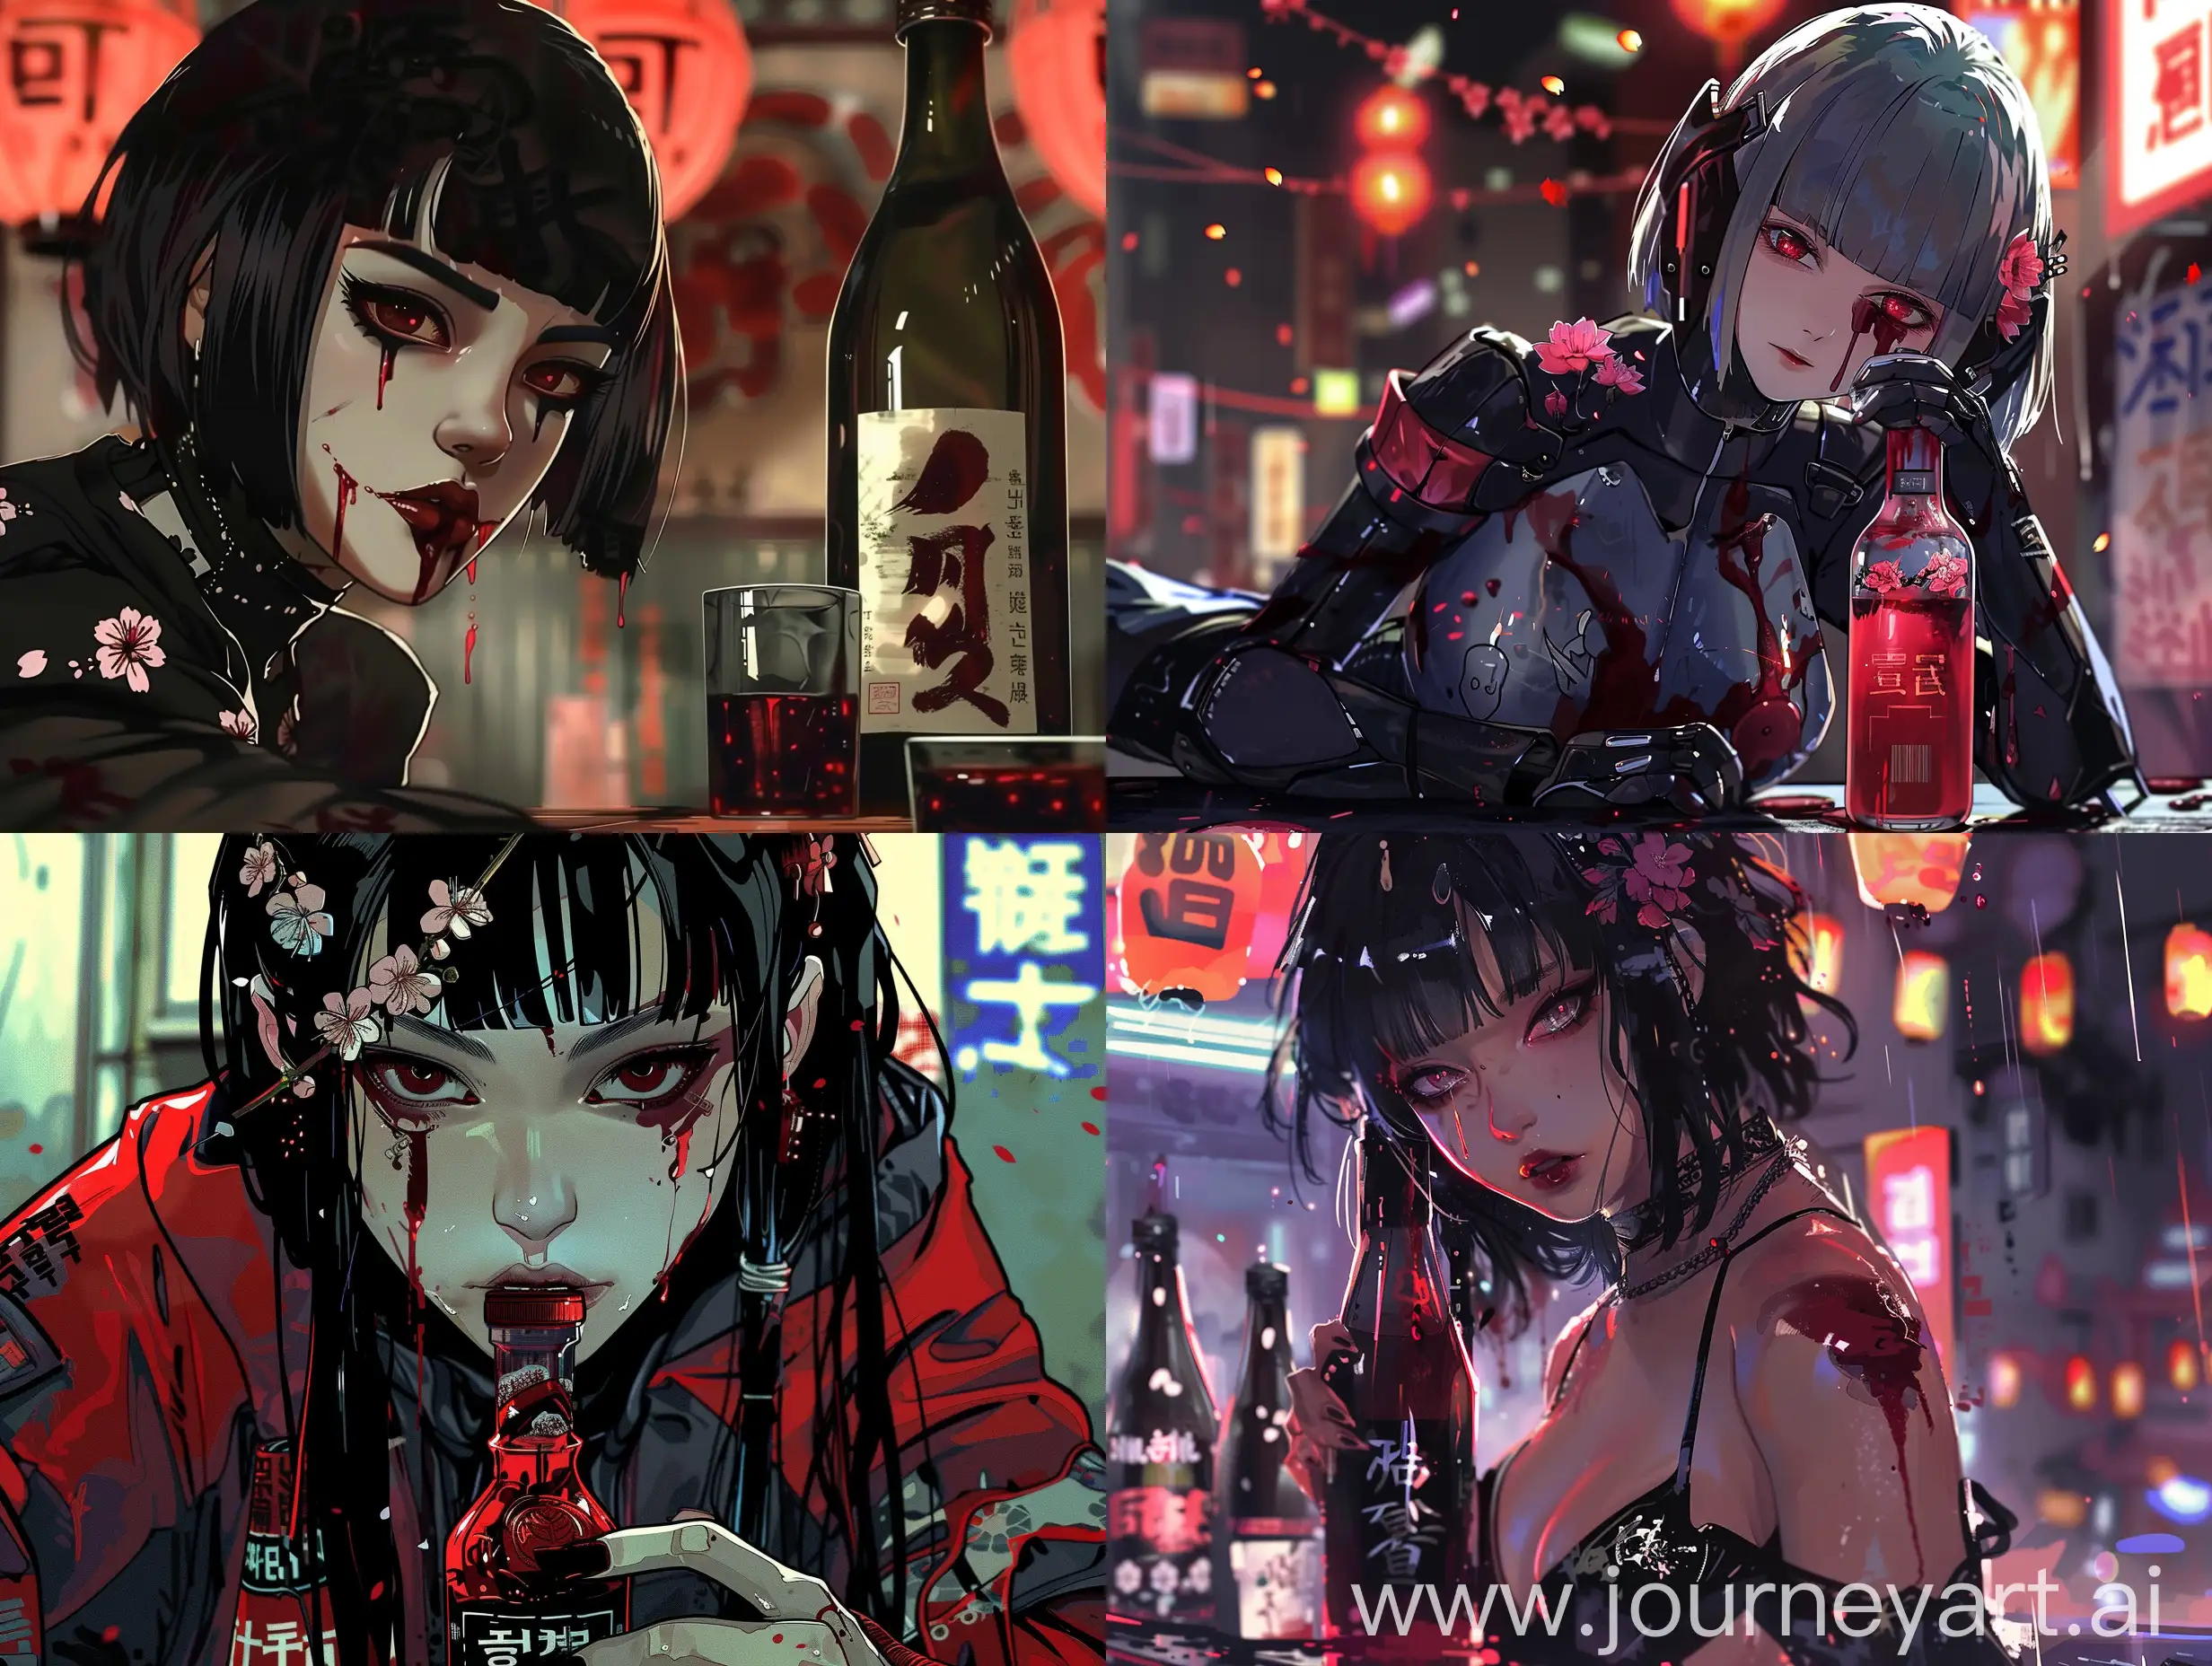 cyberpunk, anime style, soju with blossoms and blood in it